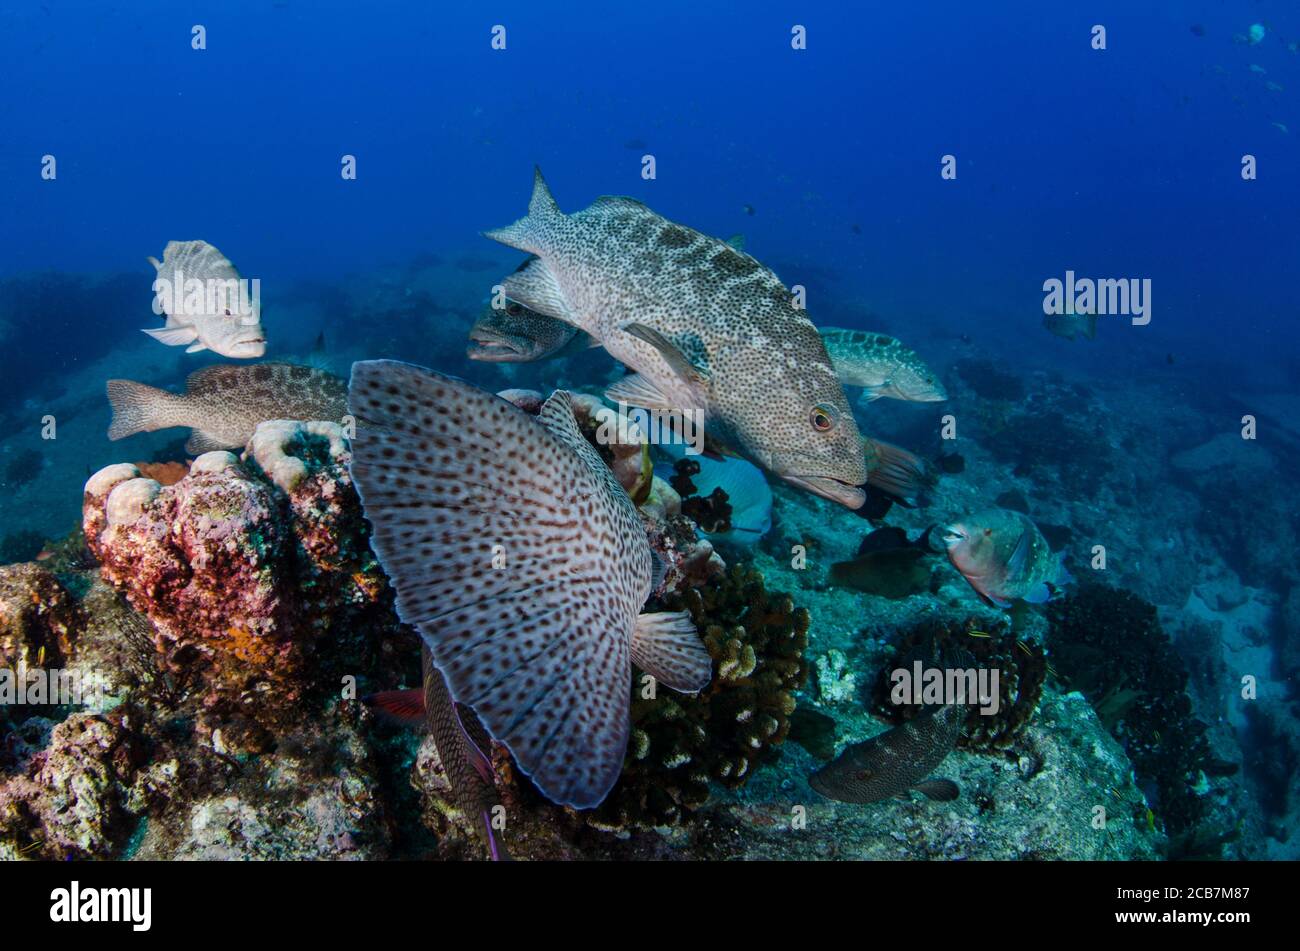 Groupers feeding from the reefs of the Sea of Cortez, Pacific ocean. Cabo Pulmo National Park, Baja California Sur, Mexico. Stock Photo